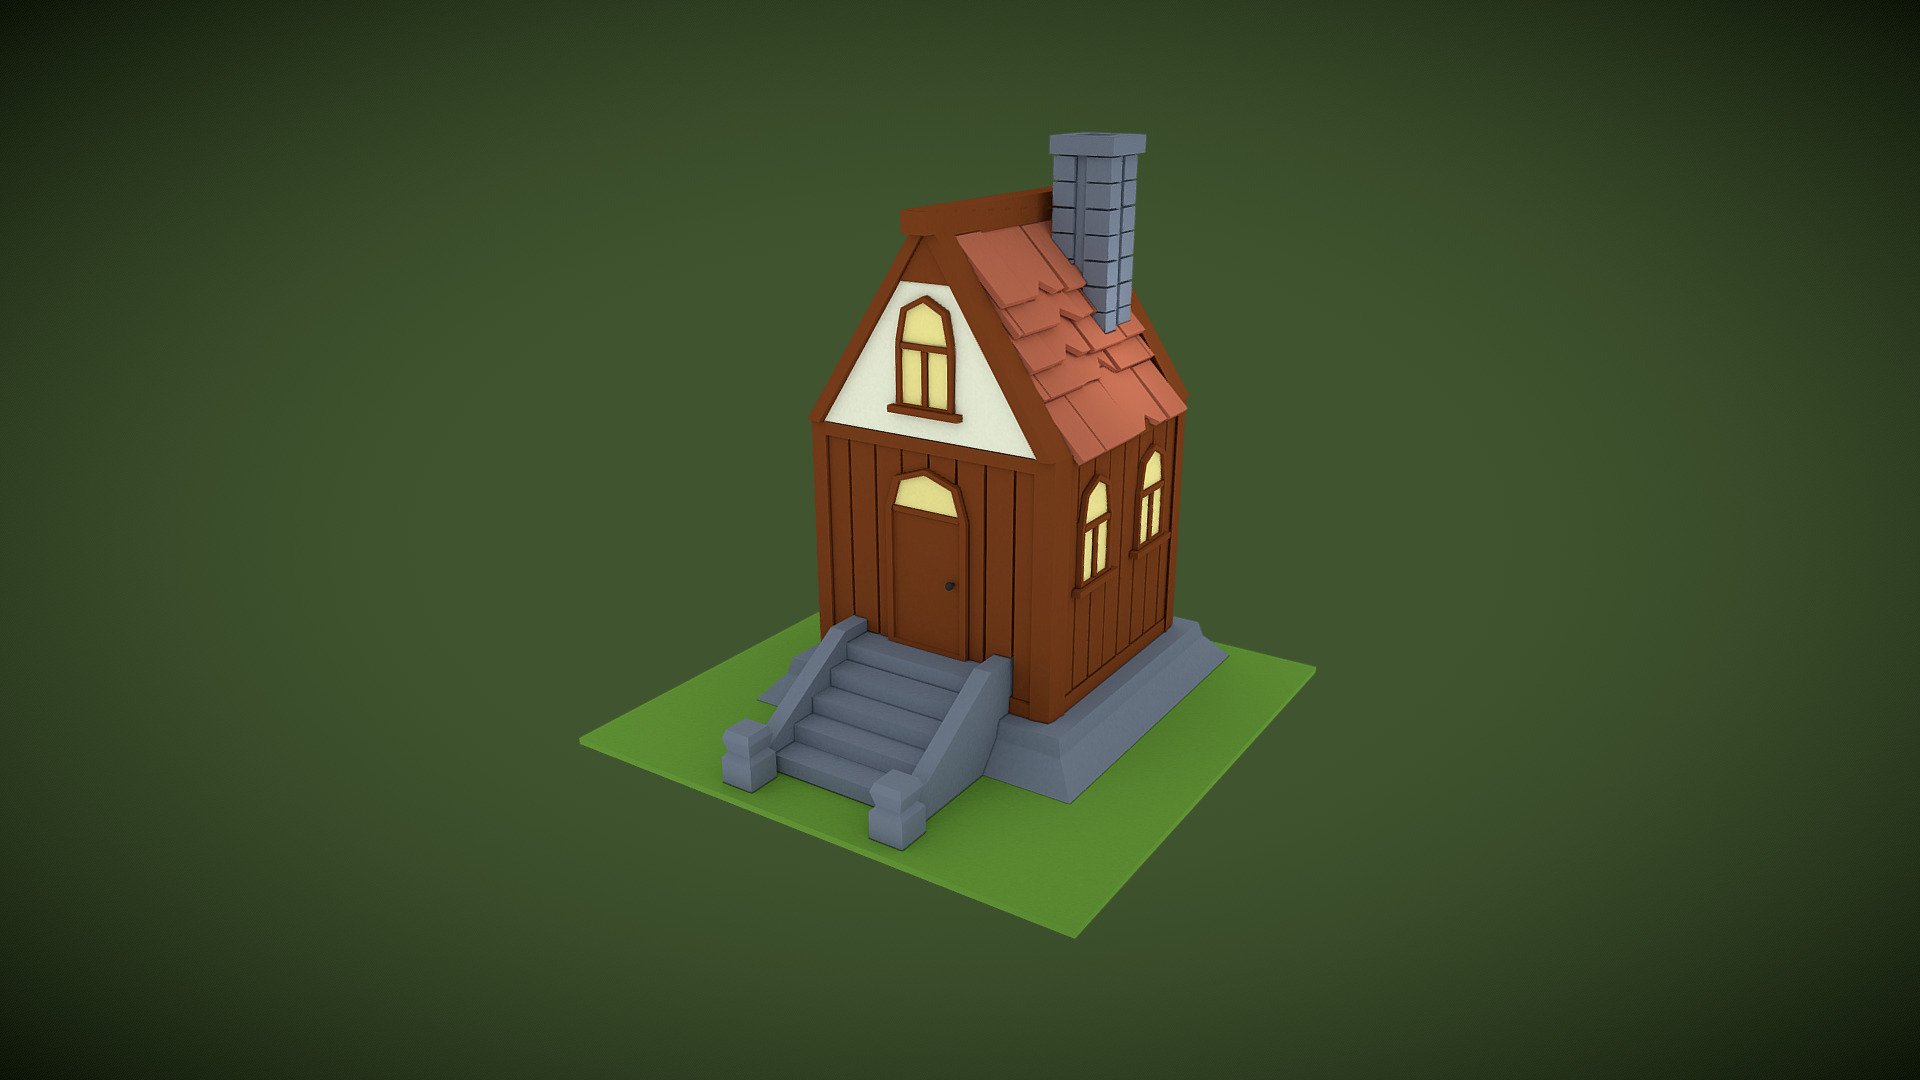 A simple cartoon-style house made in Blender 2.7 3d model